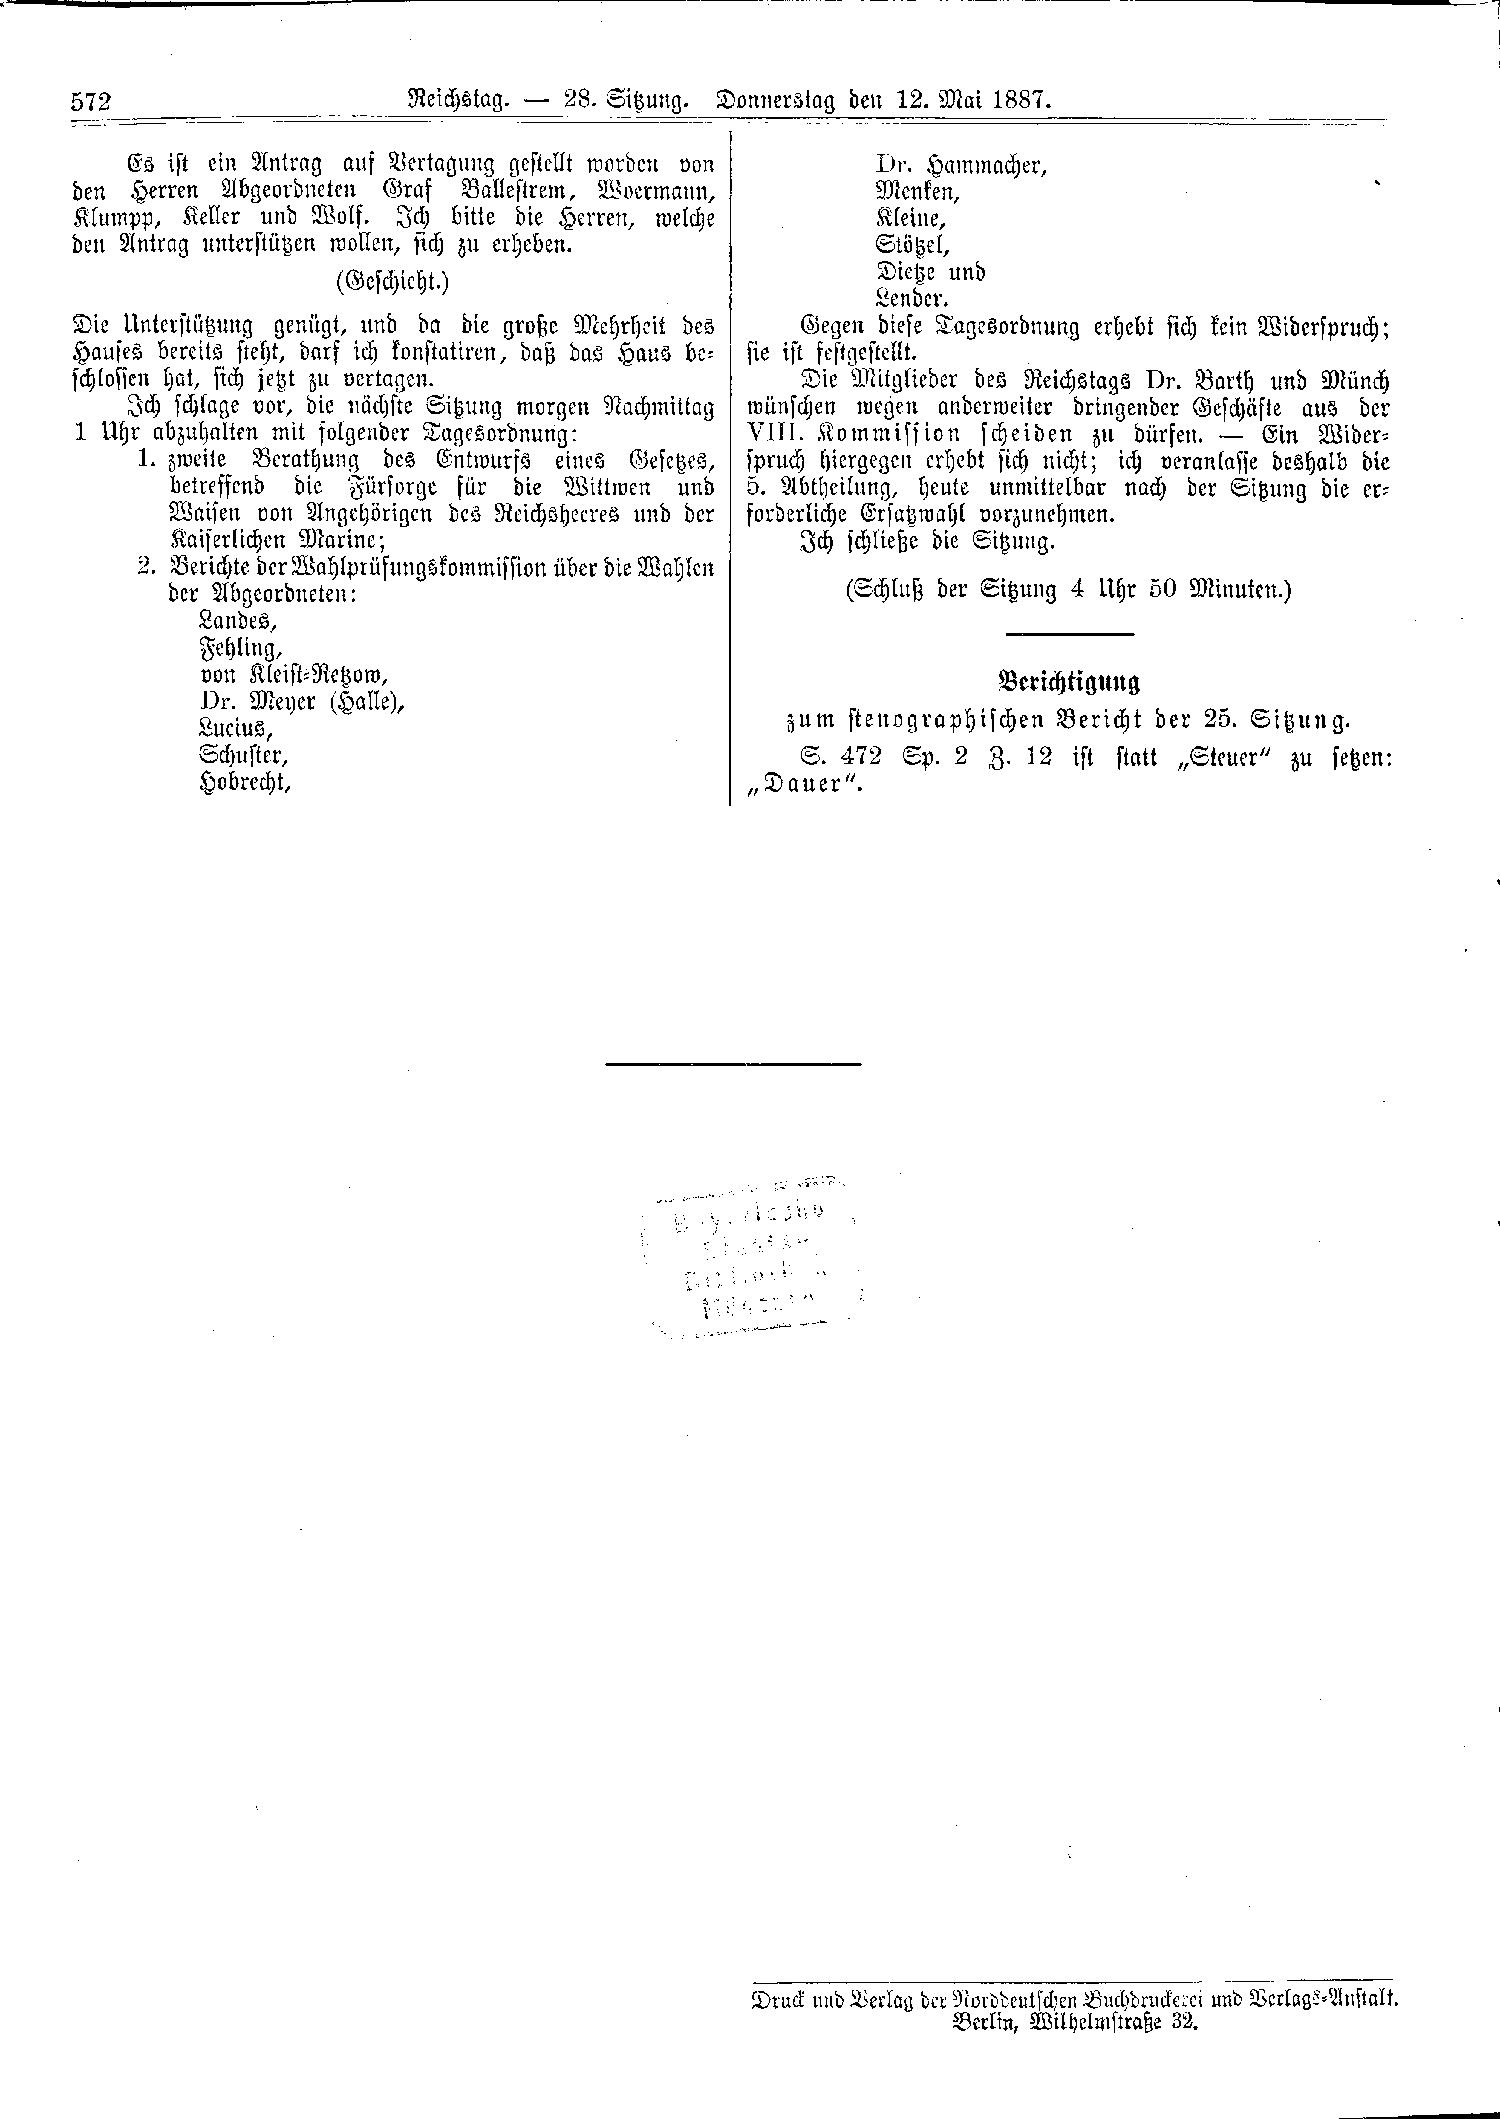 Scan of page 572